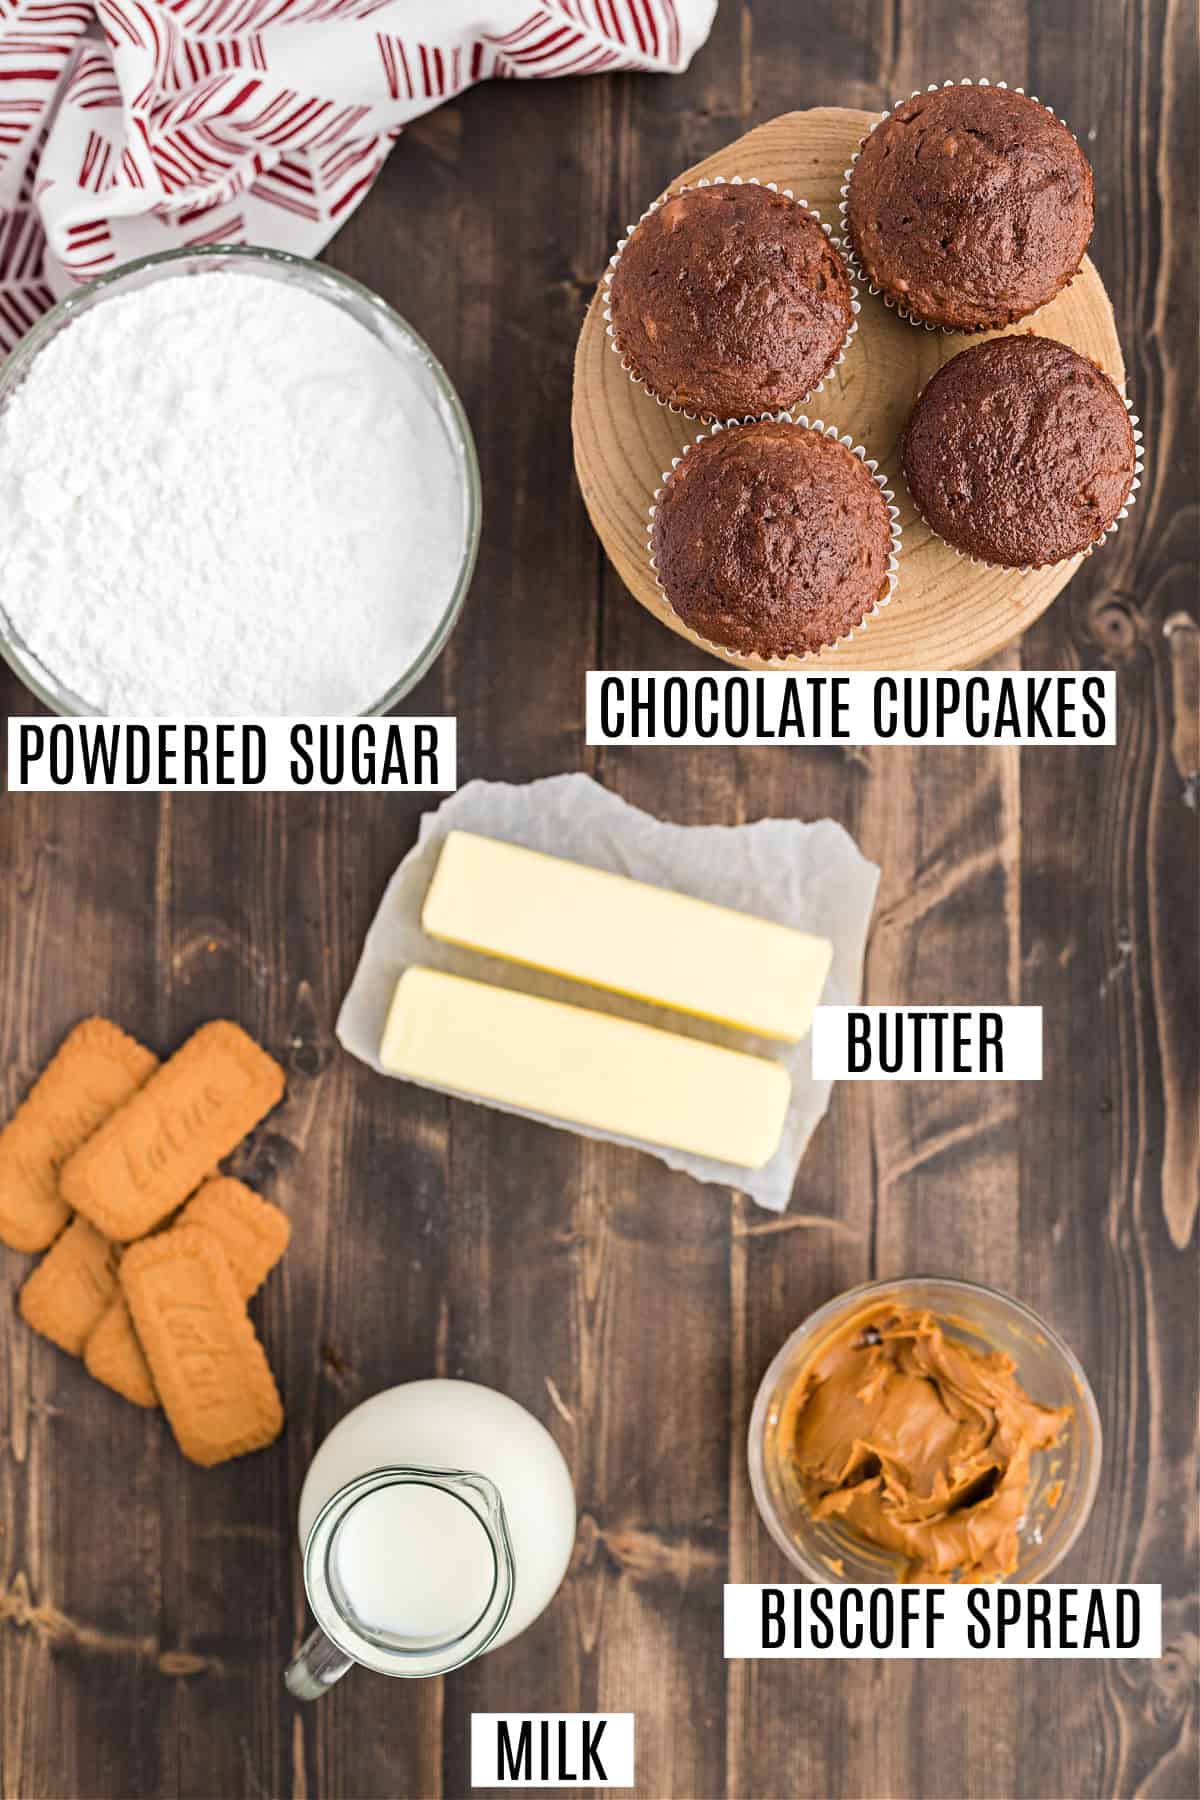 Ingredients needed to make biscoff frosting for chocolate cupcakes.